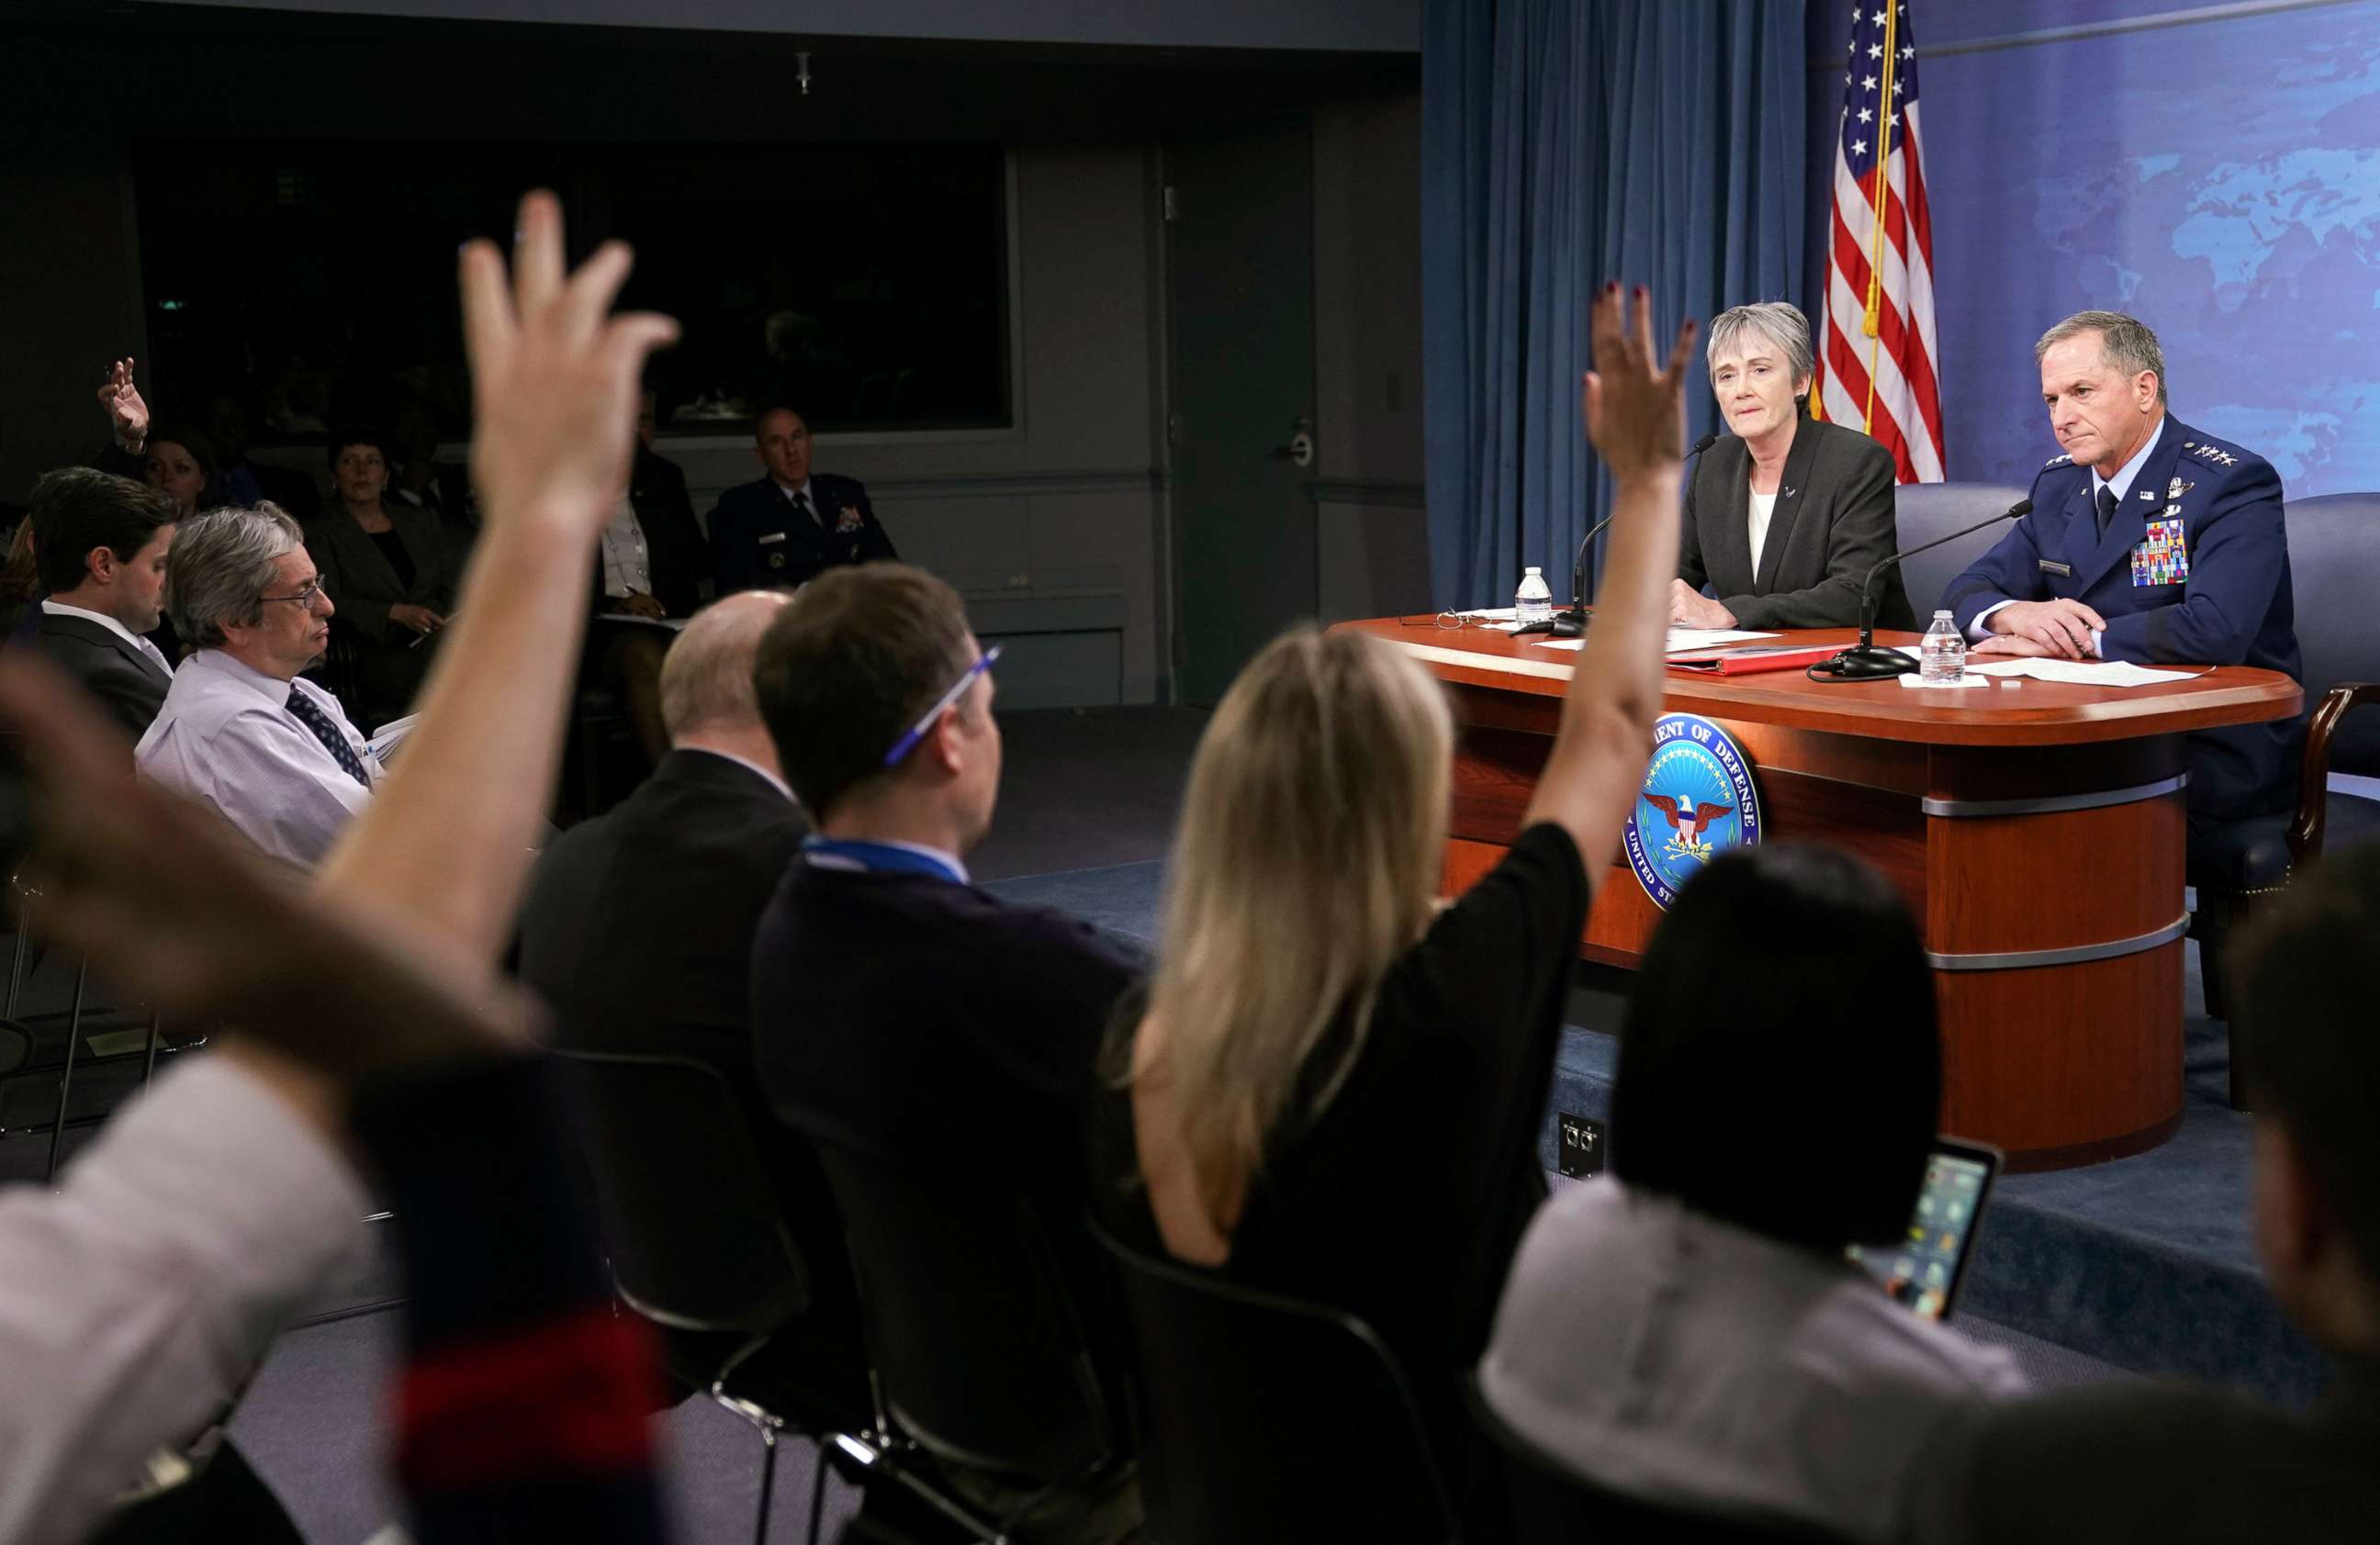 PHOTO: Journalist raise their hands during a news briefing by Gen. David L. Goldfein, far right, Chief of Staff of the U.S. Air Force and Air Force Secretary Heather Wilson at the Pentagon, Nov. 9, 2017.